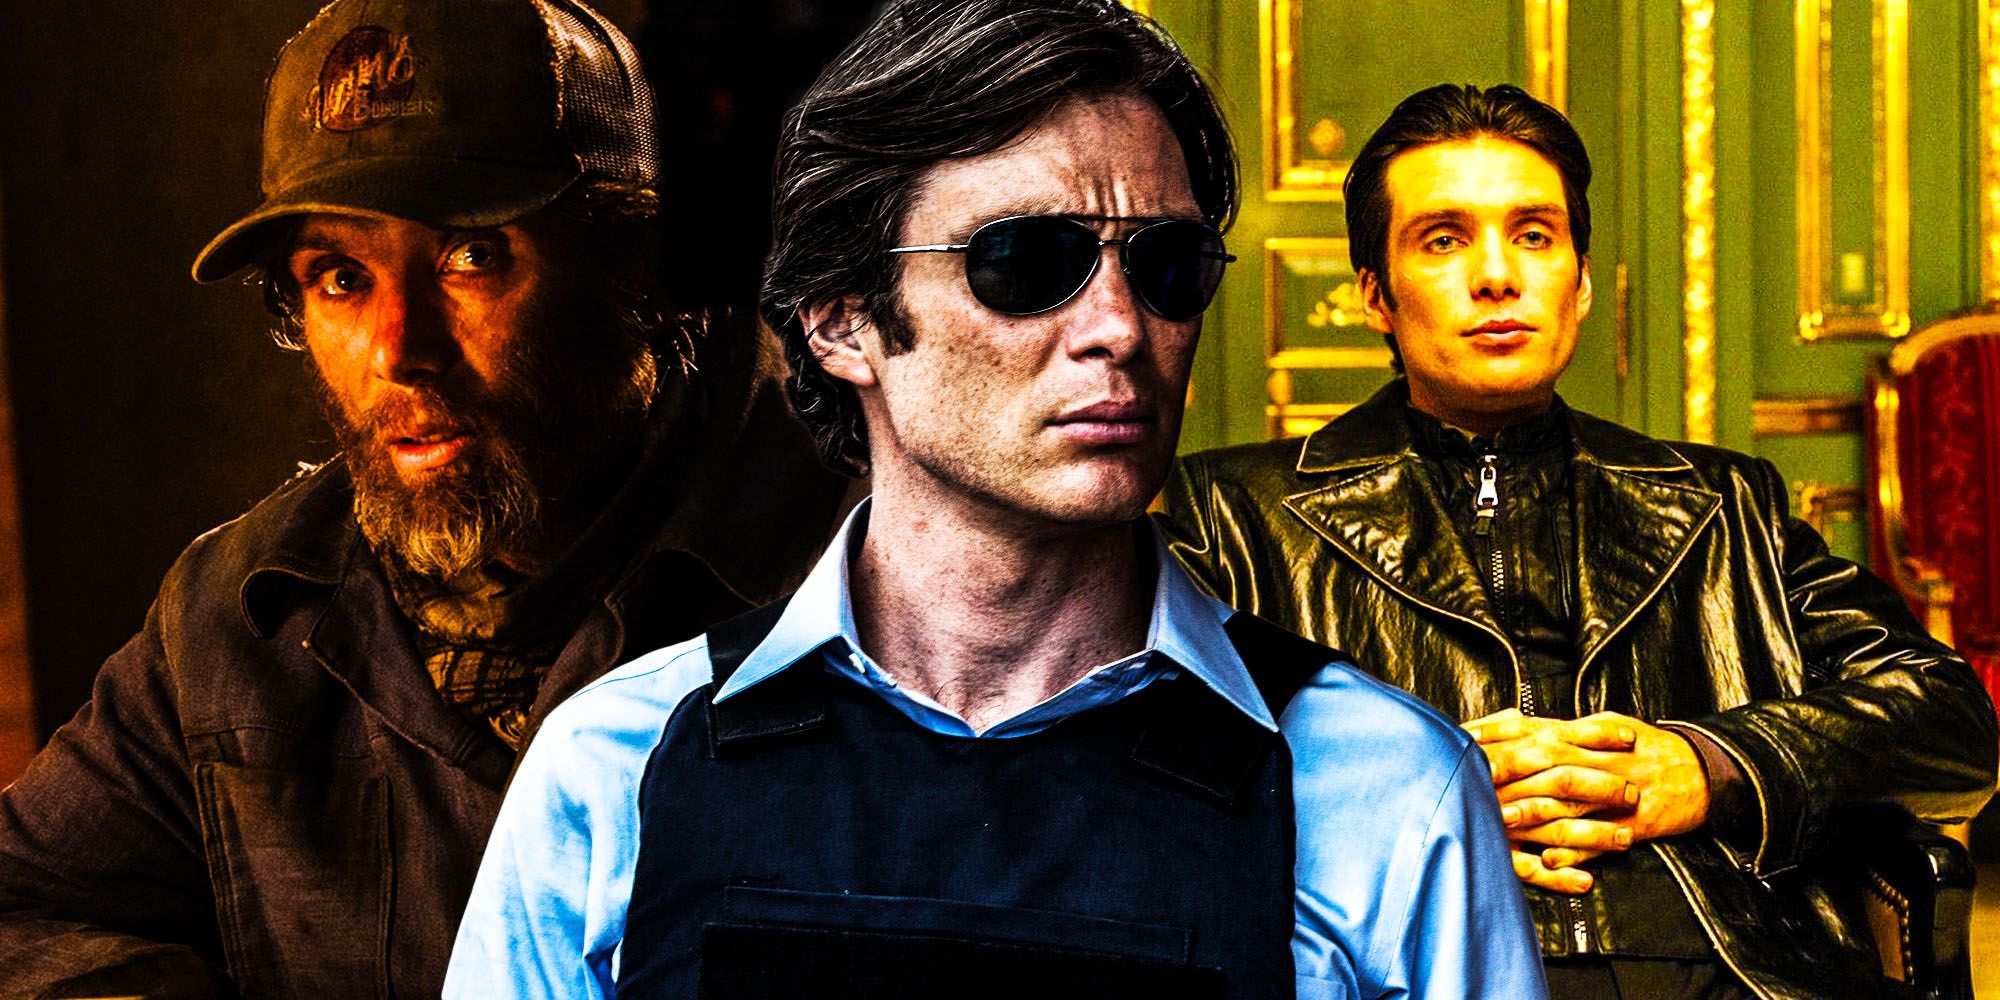 Cillian Murphy Sci fi movies best to worst In time Quiet place 2 transcendence